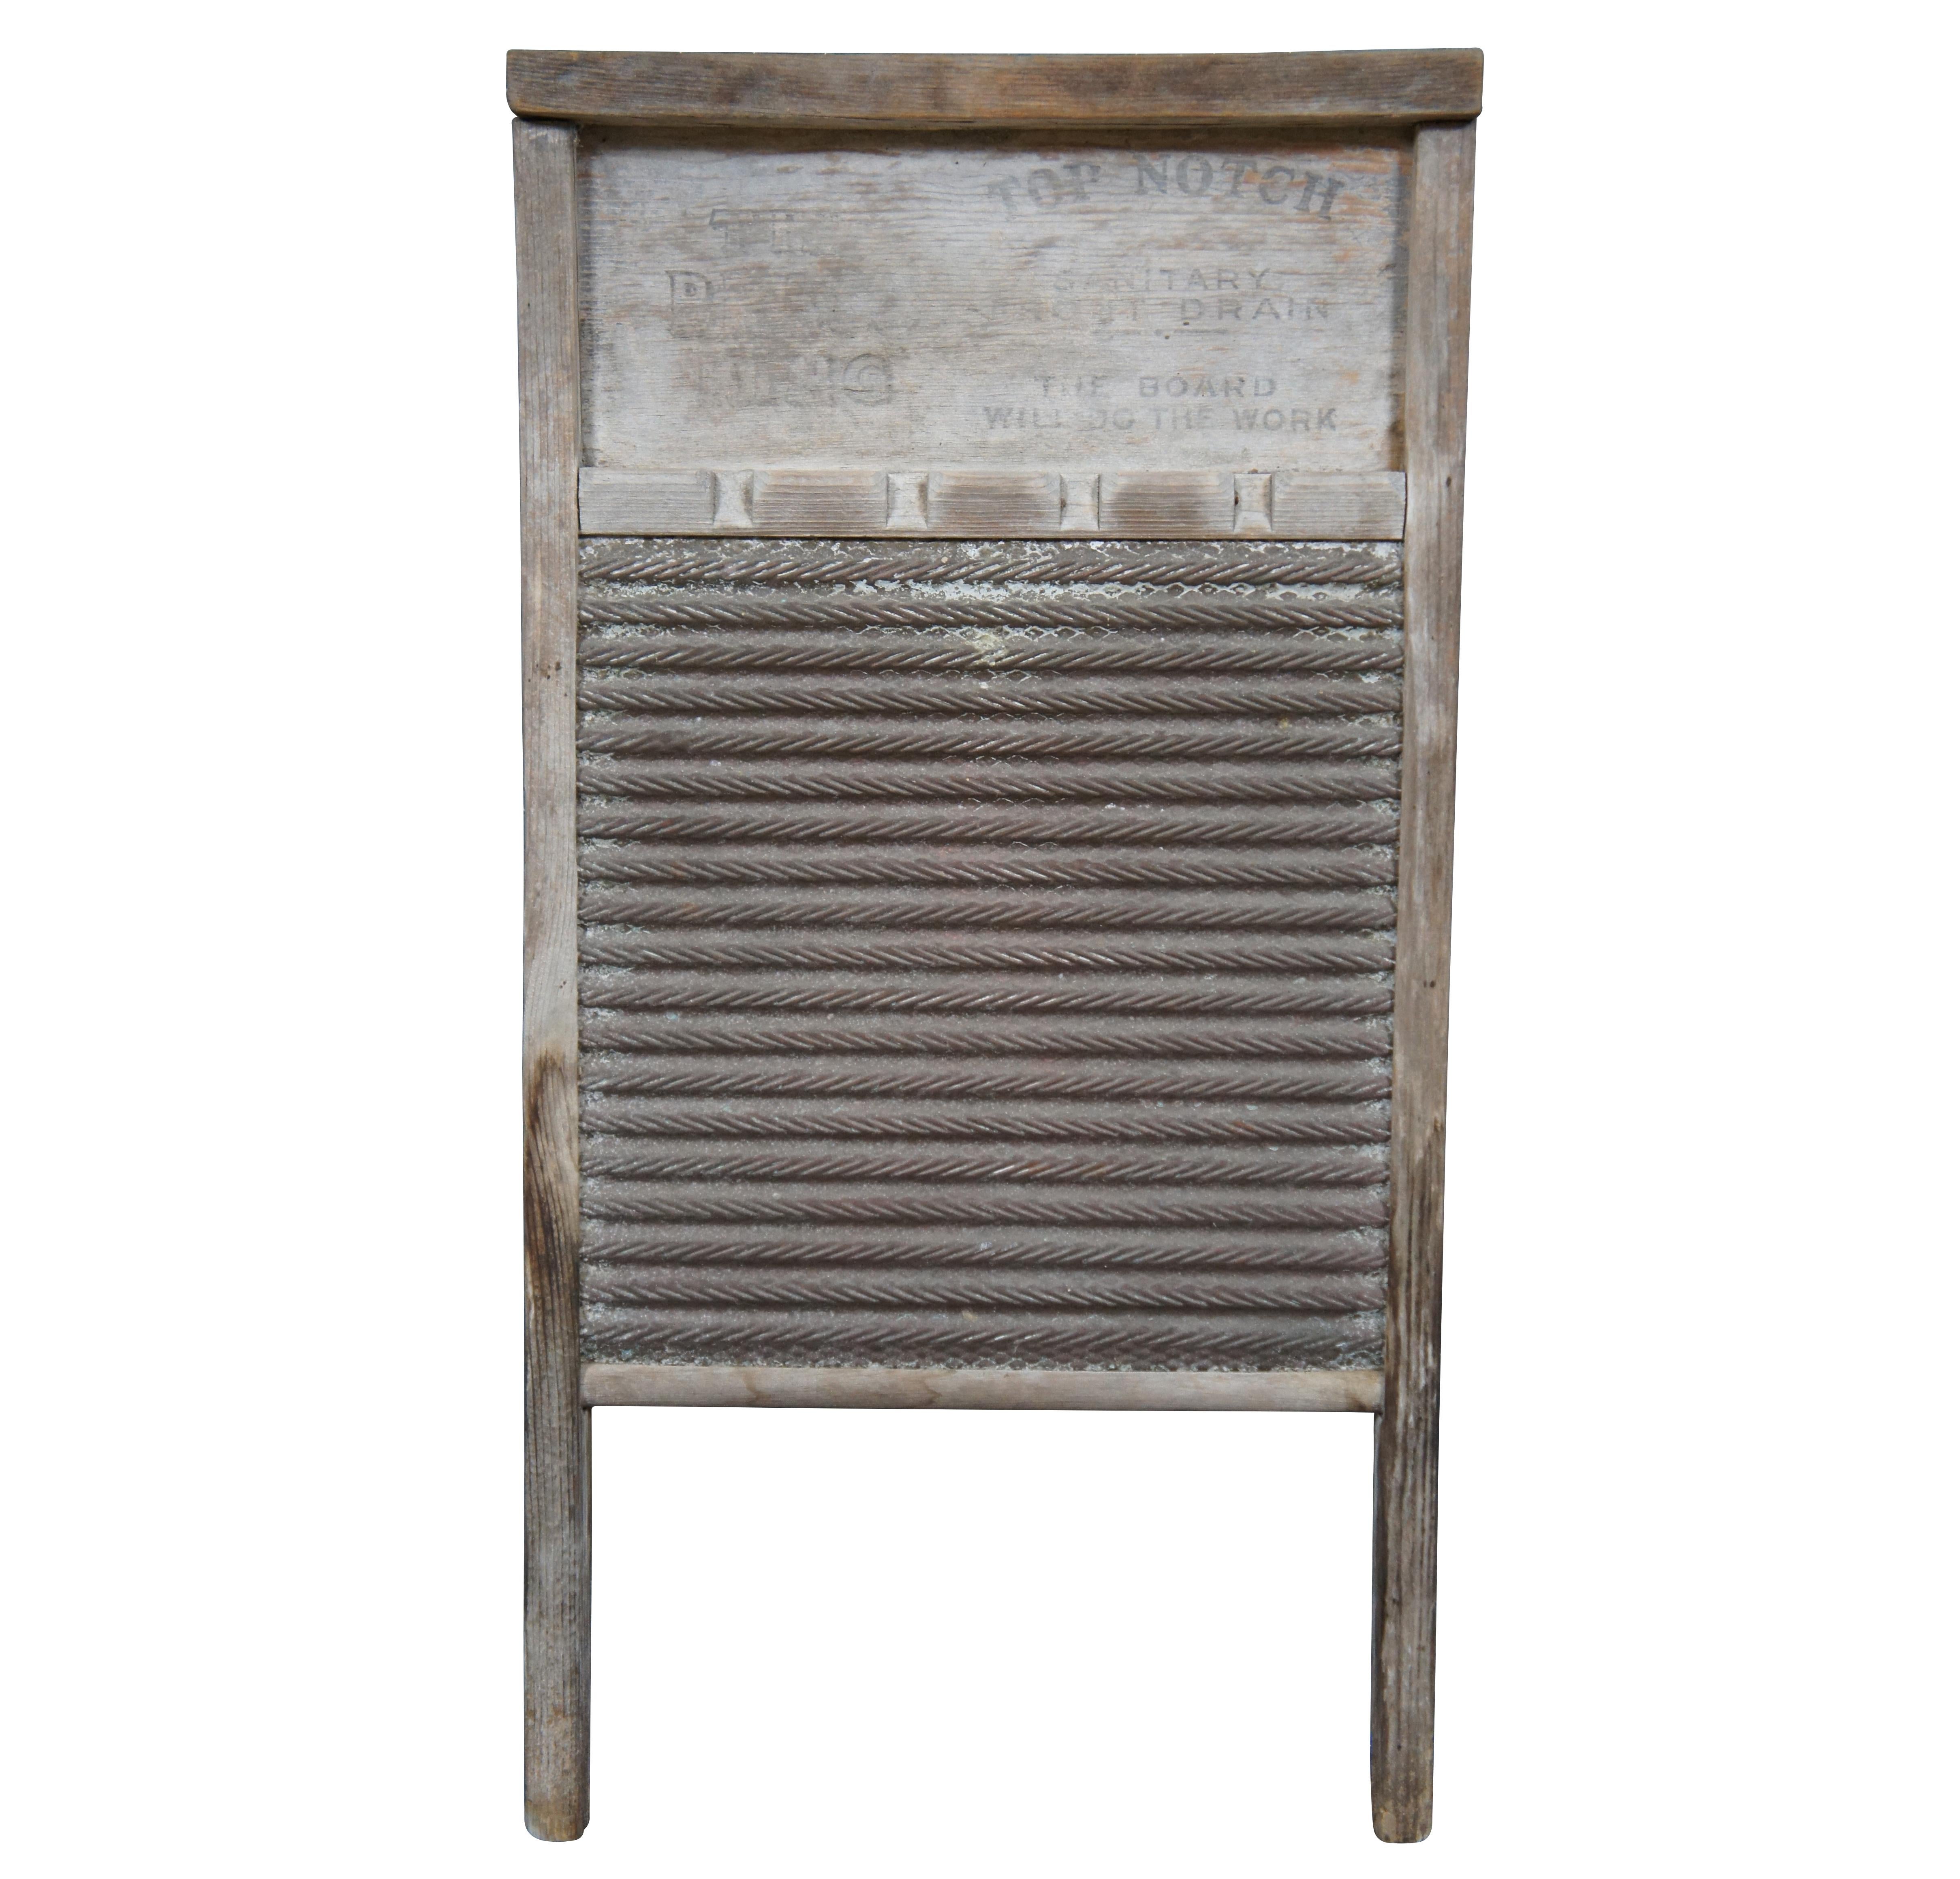 Rustic Antique National Washboard Co Brass King Laundry Wash Board No 803